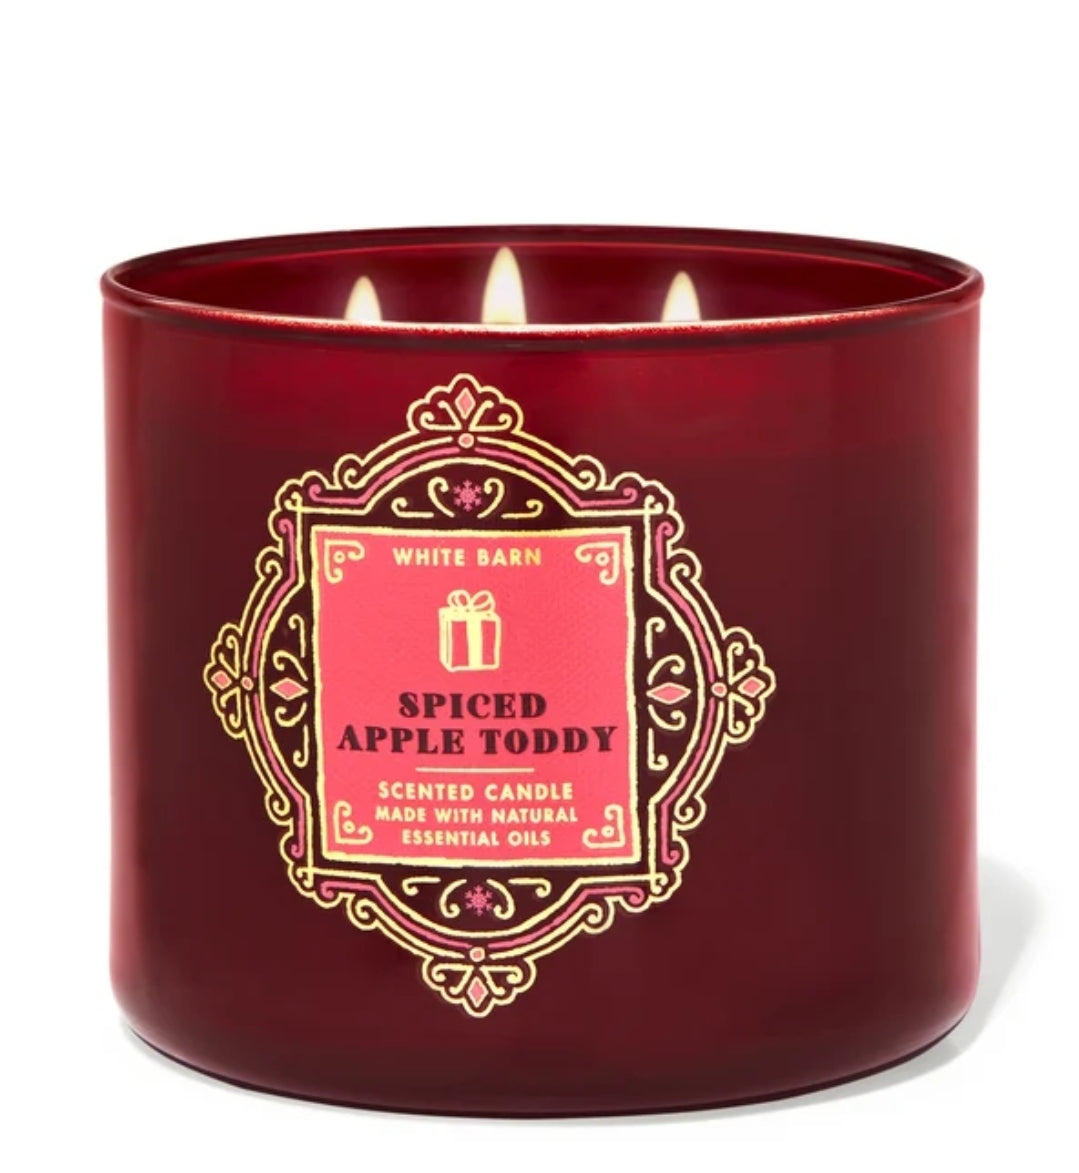 Spiced Apple Toddy Scented Candle